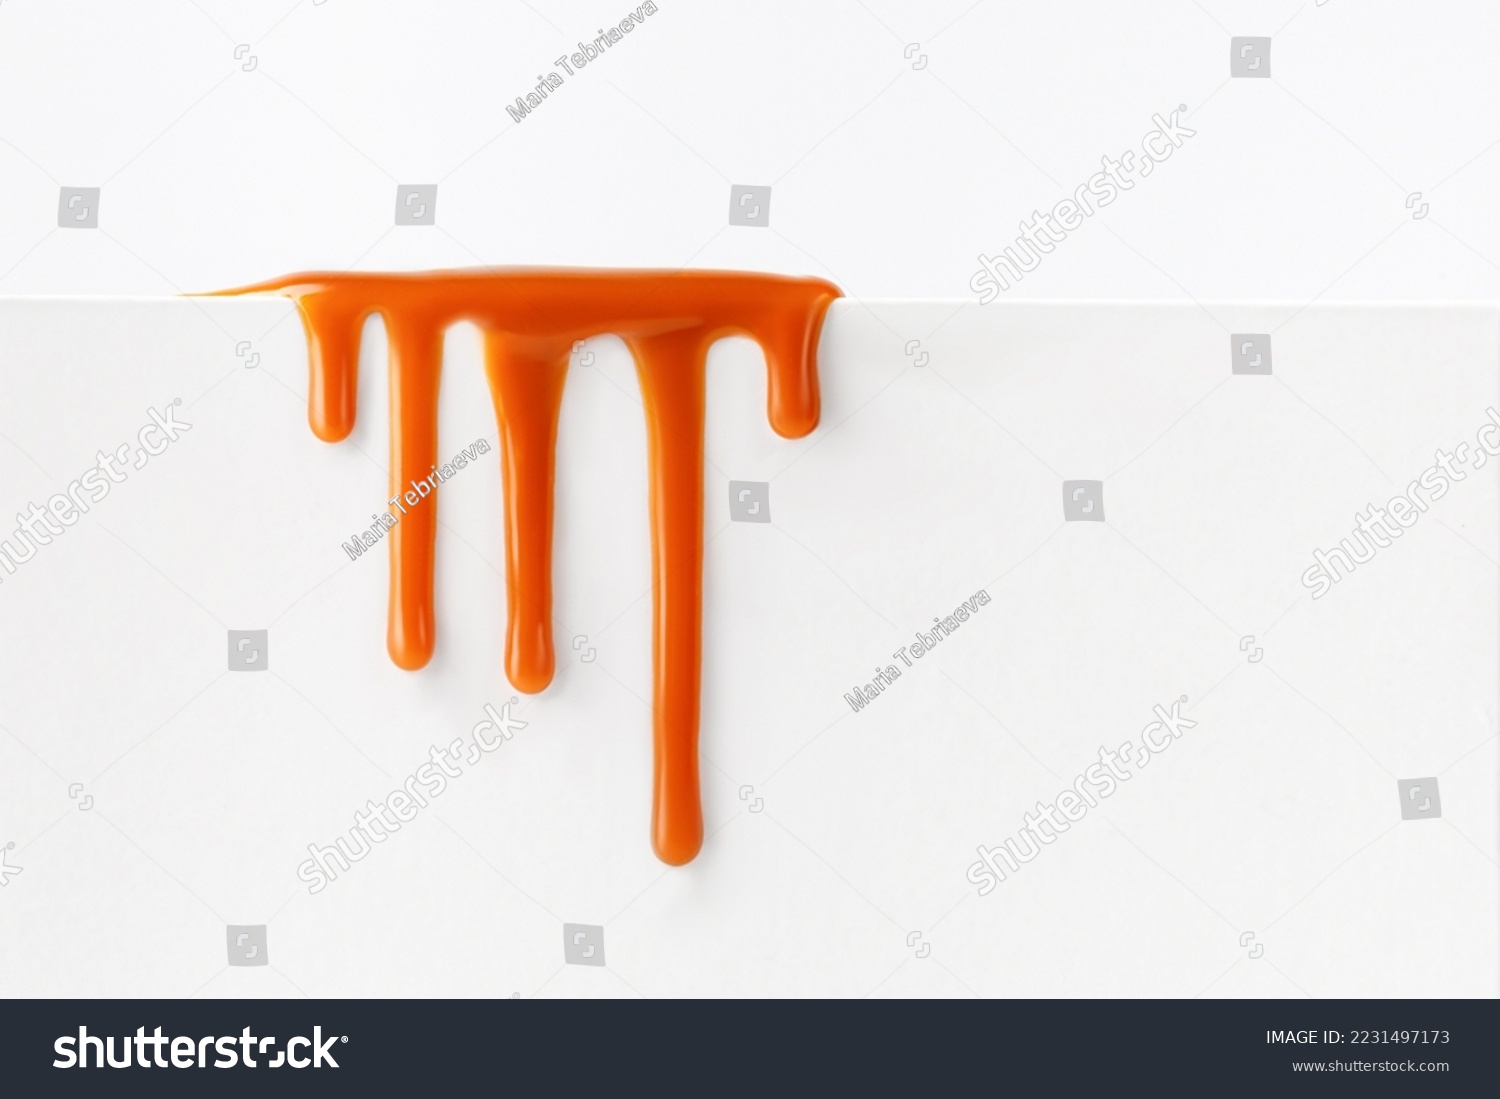 Dripping caramel drops of sweet caramel sauce isolated on white background. Melted caramel sauce drip, drops of sweet liquid toffee. #2231497173